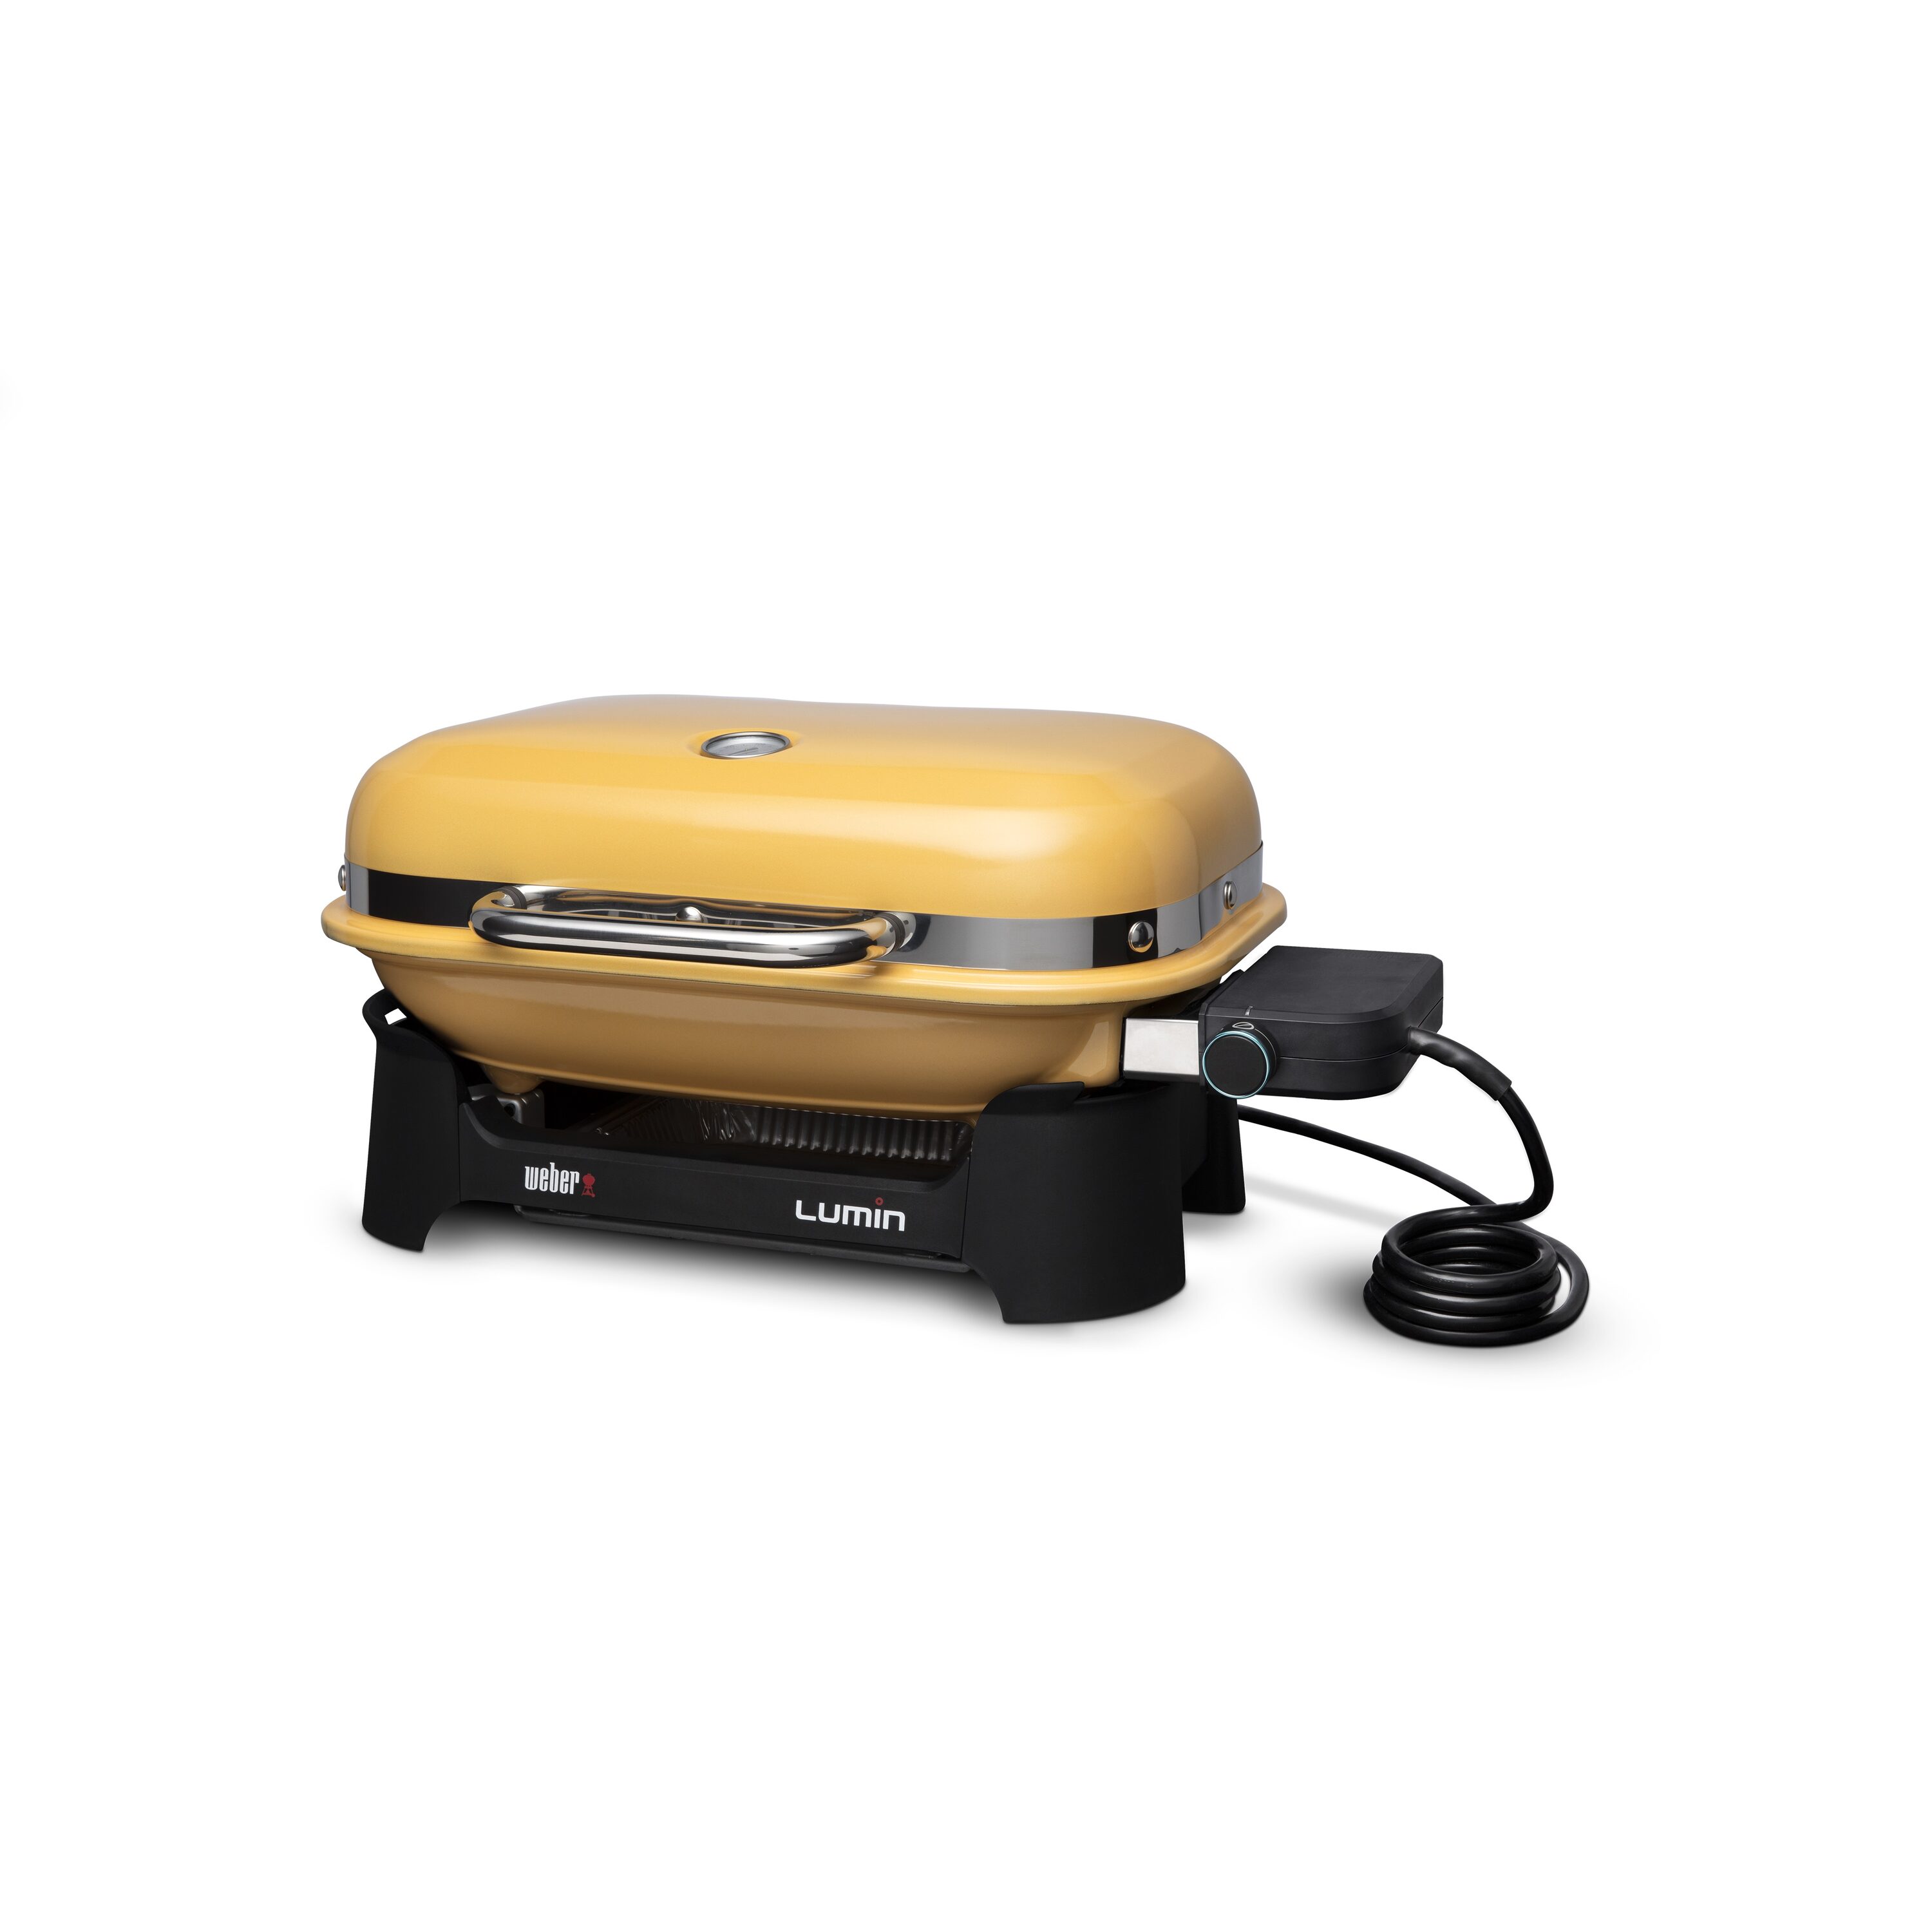 Broil King 201119 1500-Watt Portable Electric Grill at Sutherlands